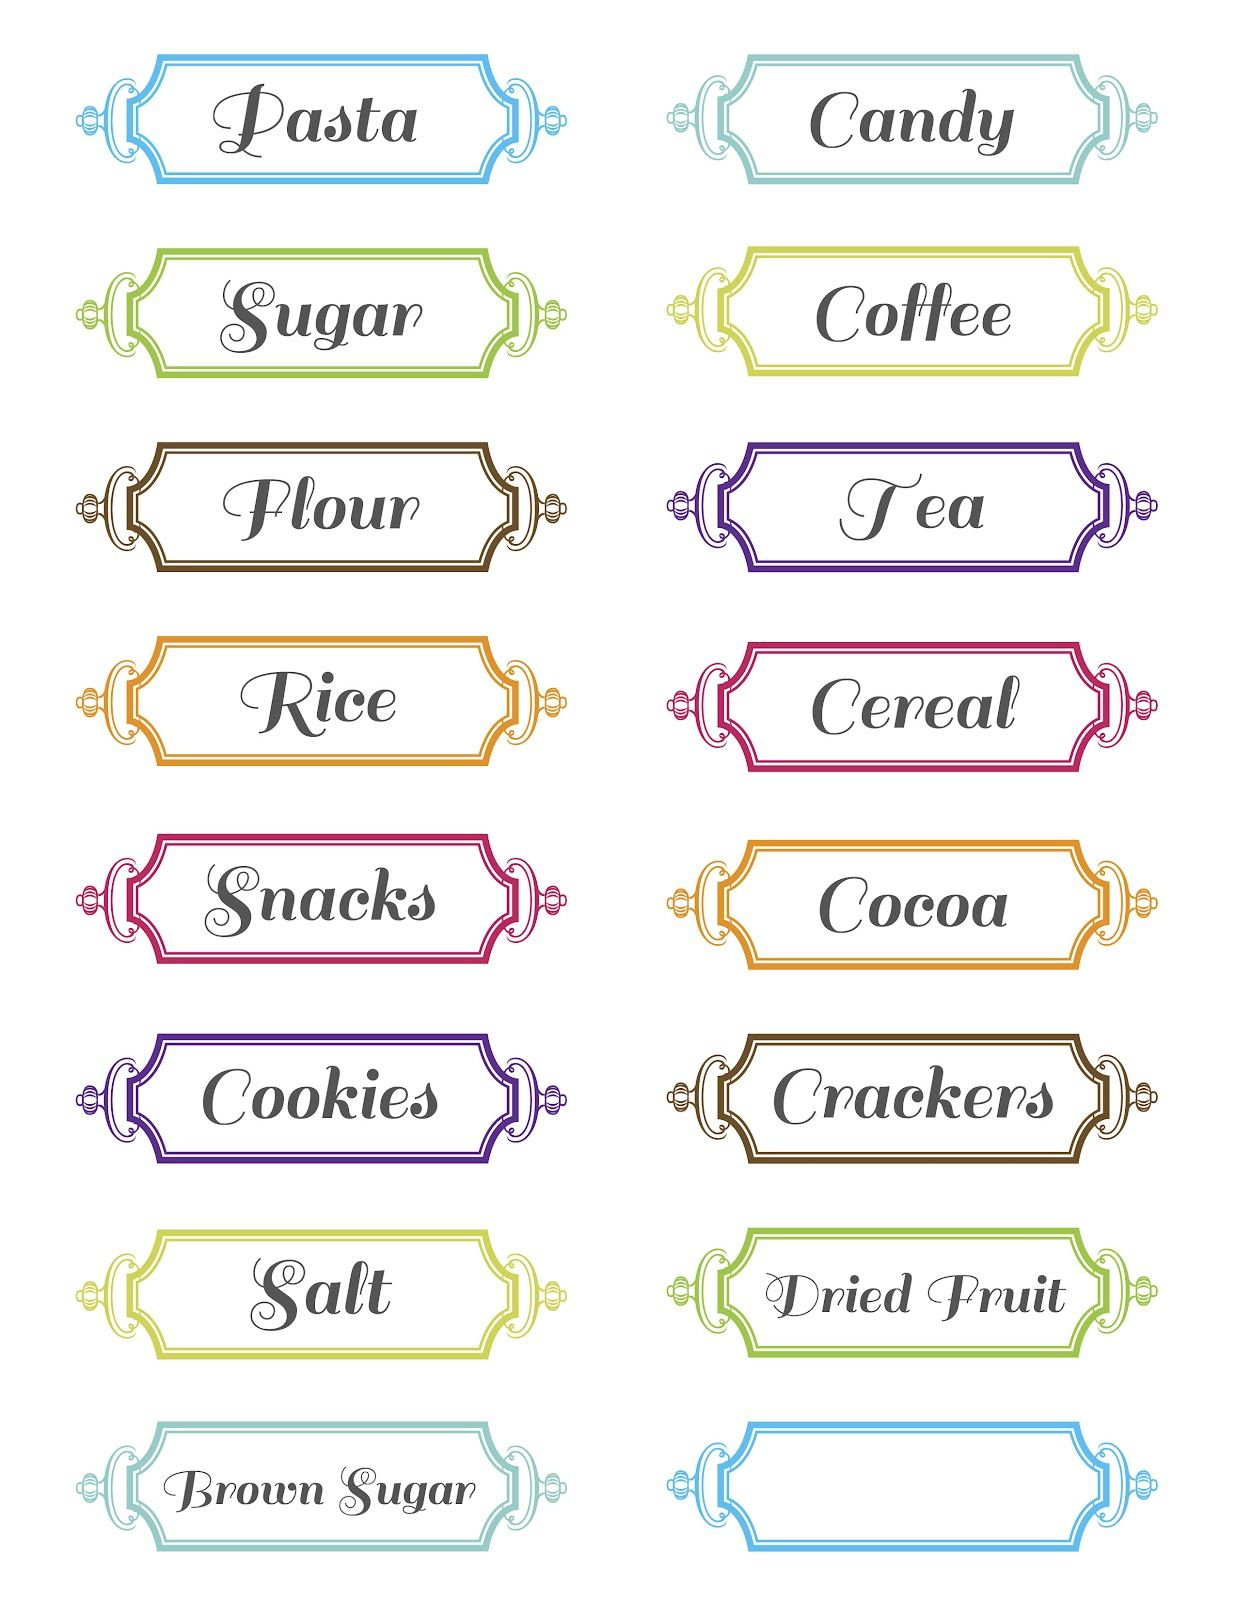 Free Printable Pantry Labels | Covers | Pinterest | Printable Labels - Free Printable Pantry Labels